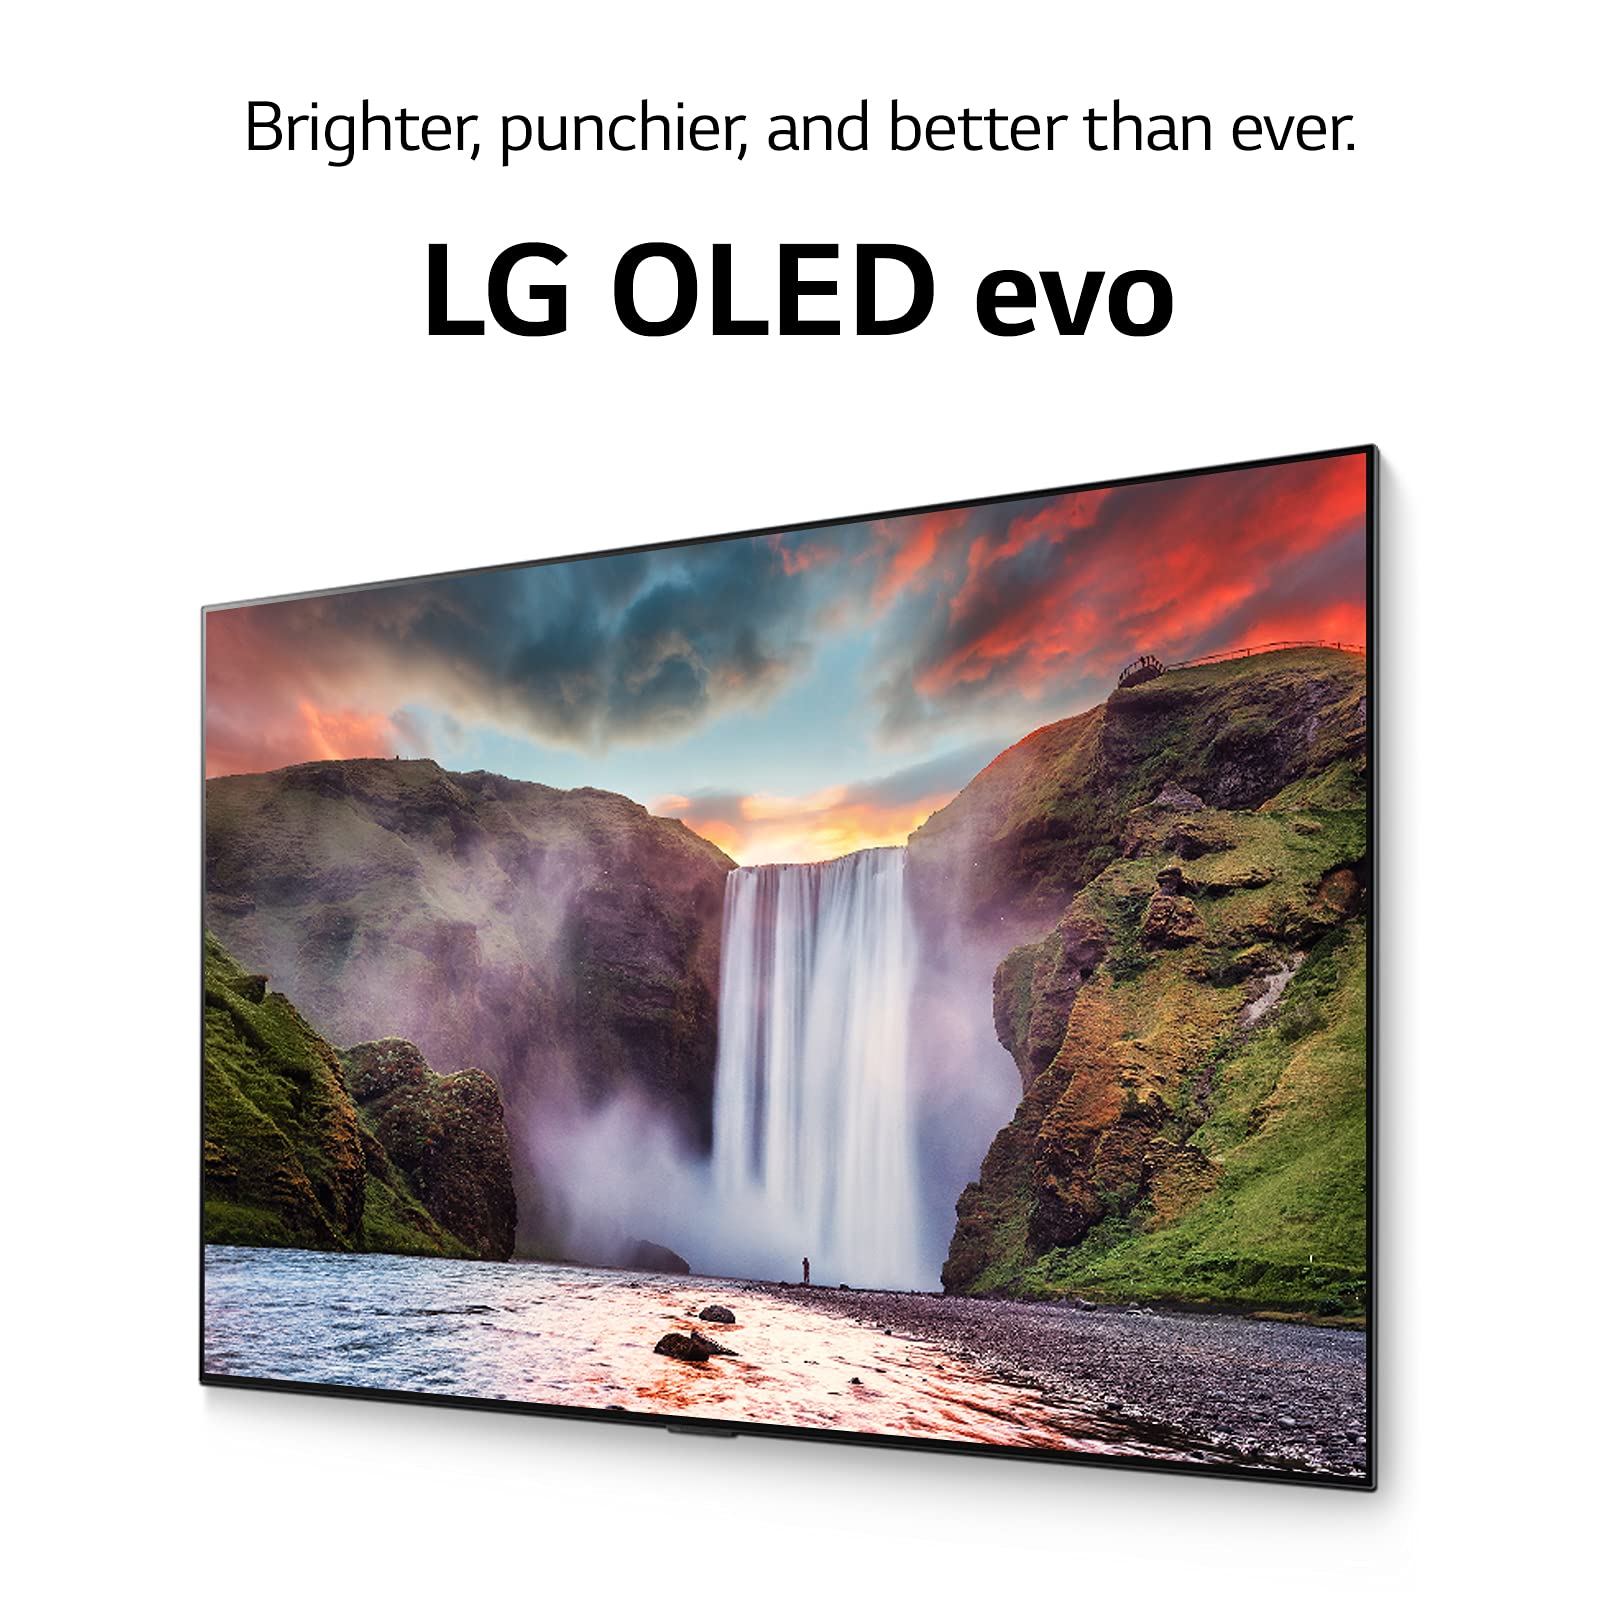 LG OLED G1 Series 65” Alexa Built-in 4k Smart OLED evo TV, Gallery Design, 120Hz Refresh Rate, AI-Powered, Dolby Vision IQ and Dolby Atmos, WiSA Ready (OLED65G1PUA, 2021)